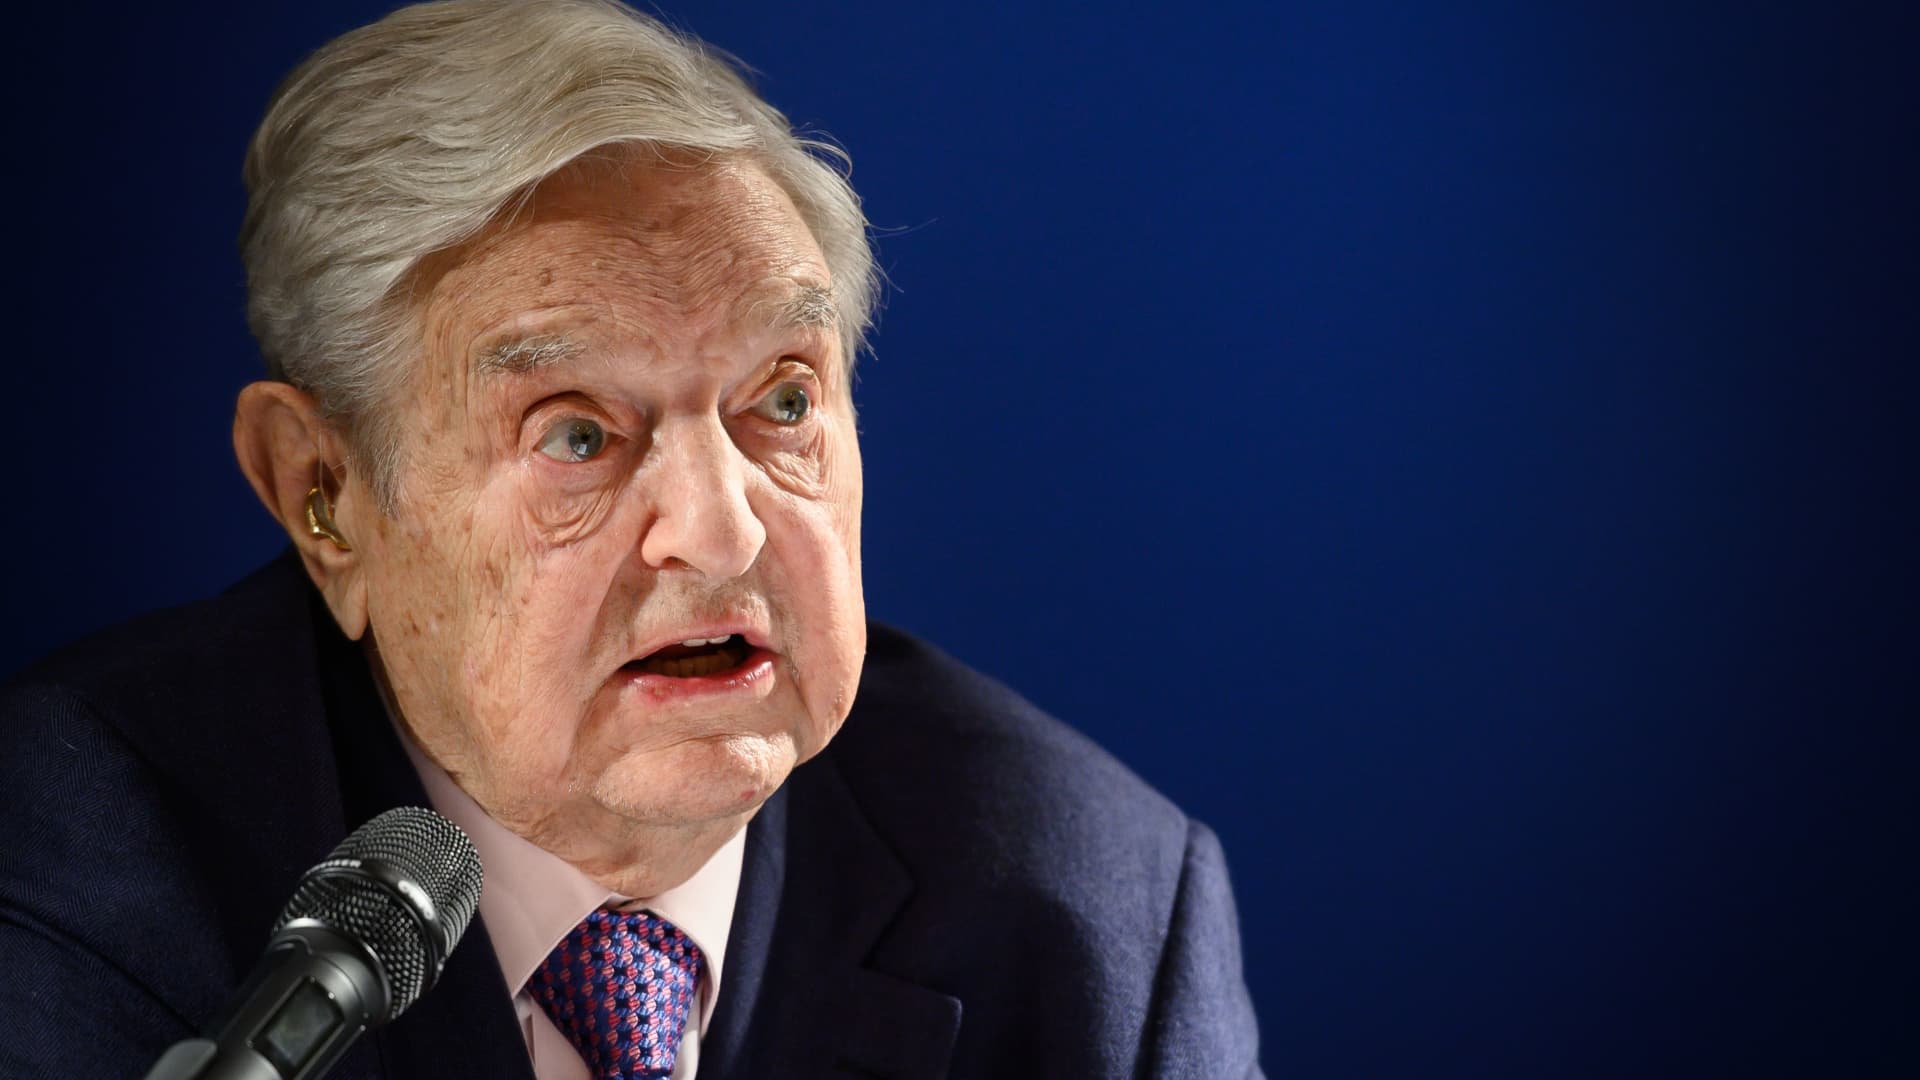 Soros: A Ukrainian victory would mean Russia no longer poses a threat to Europe or the world